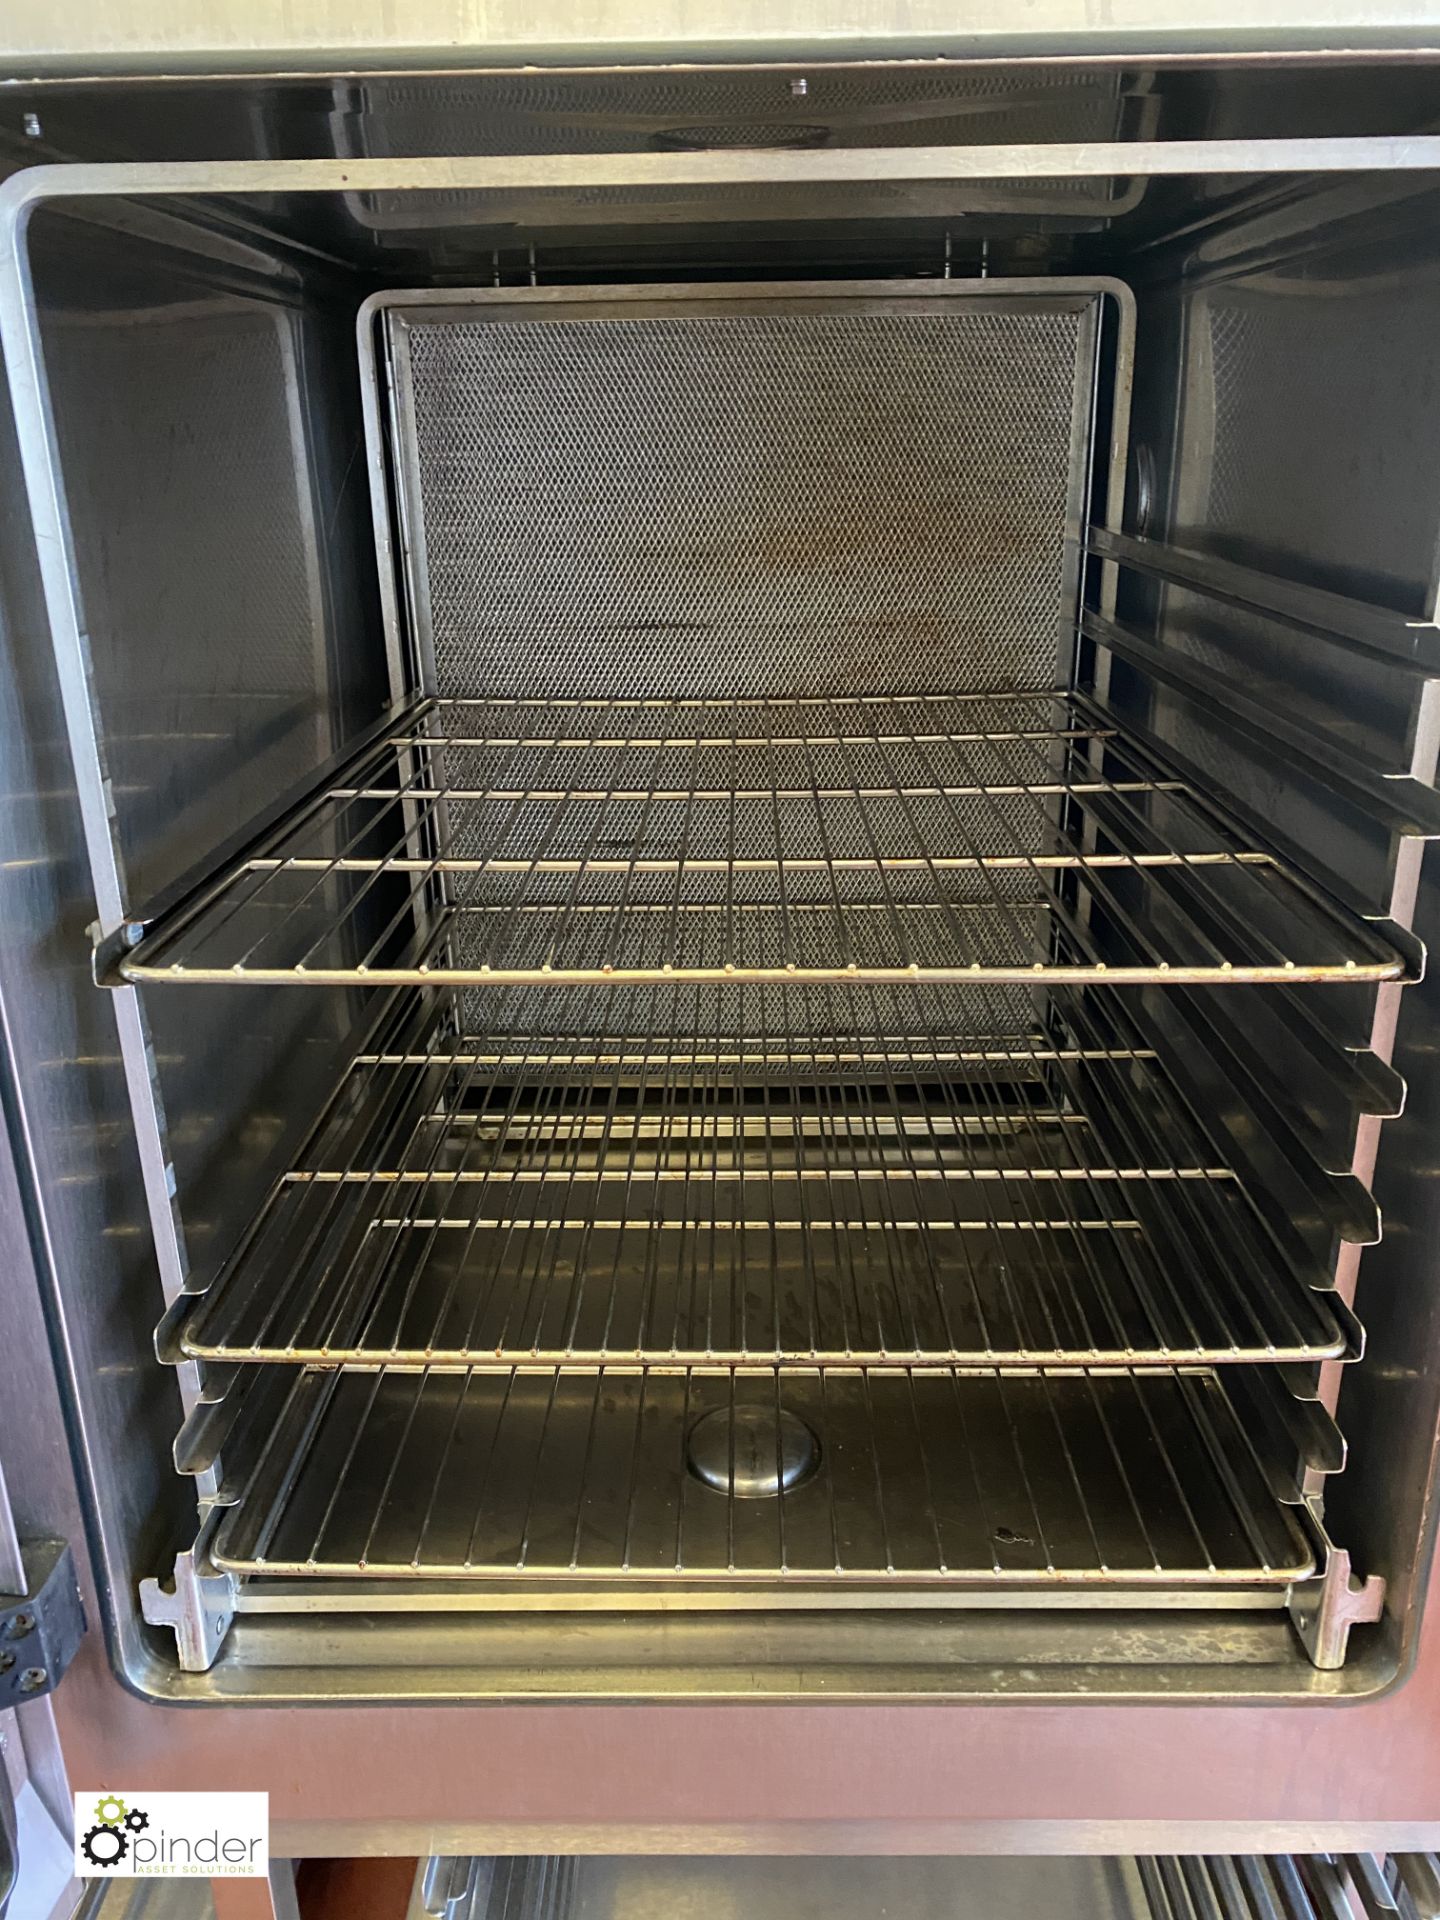 Hobart STE-H Combi Oven, 8-tray capacity, 400volts, 900mm x 1113mm x 1660mm (lot location – Parkview - Image 5 of 6